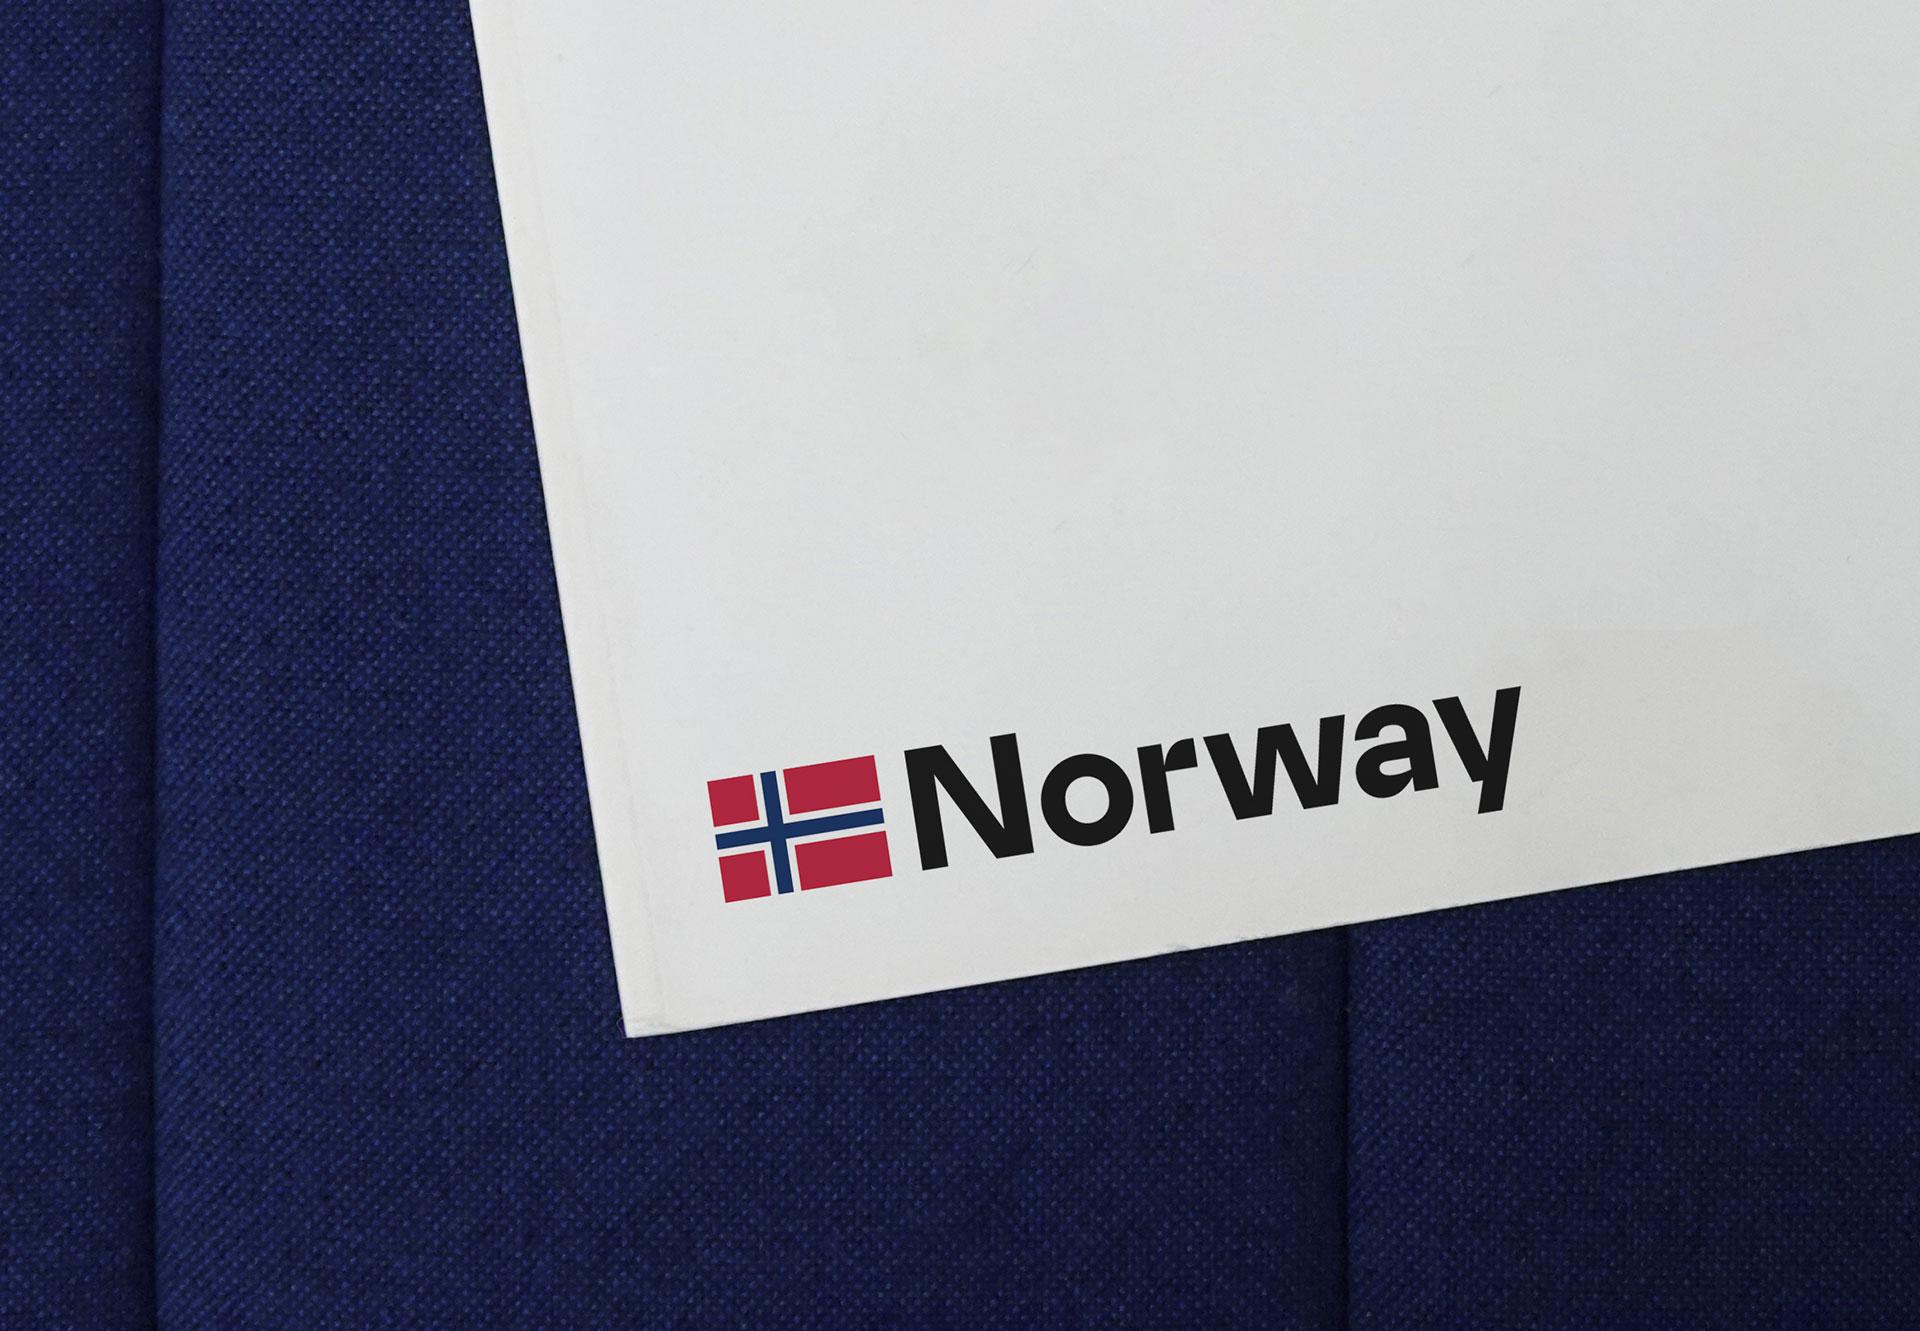 the National Norway logo on a paper with a blue background